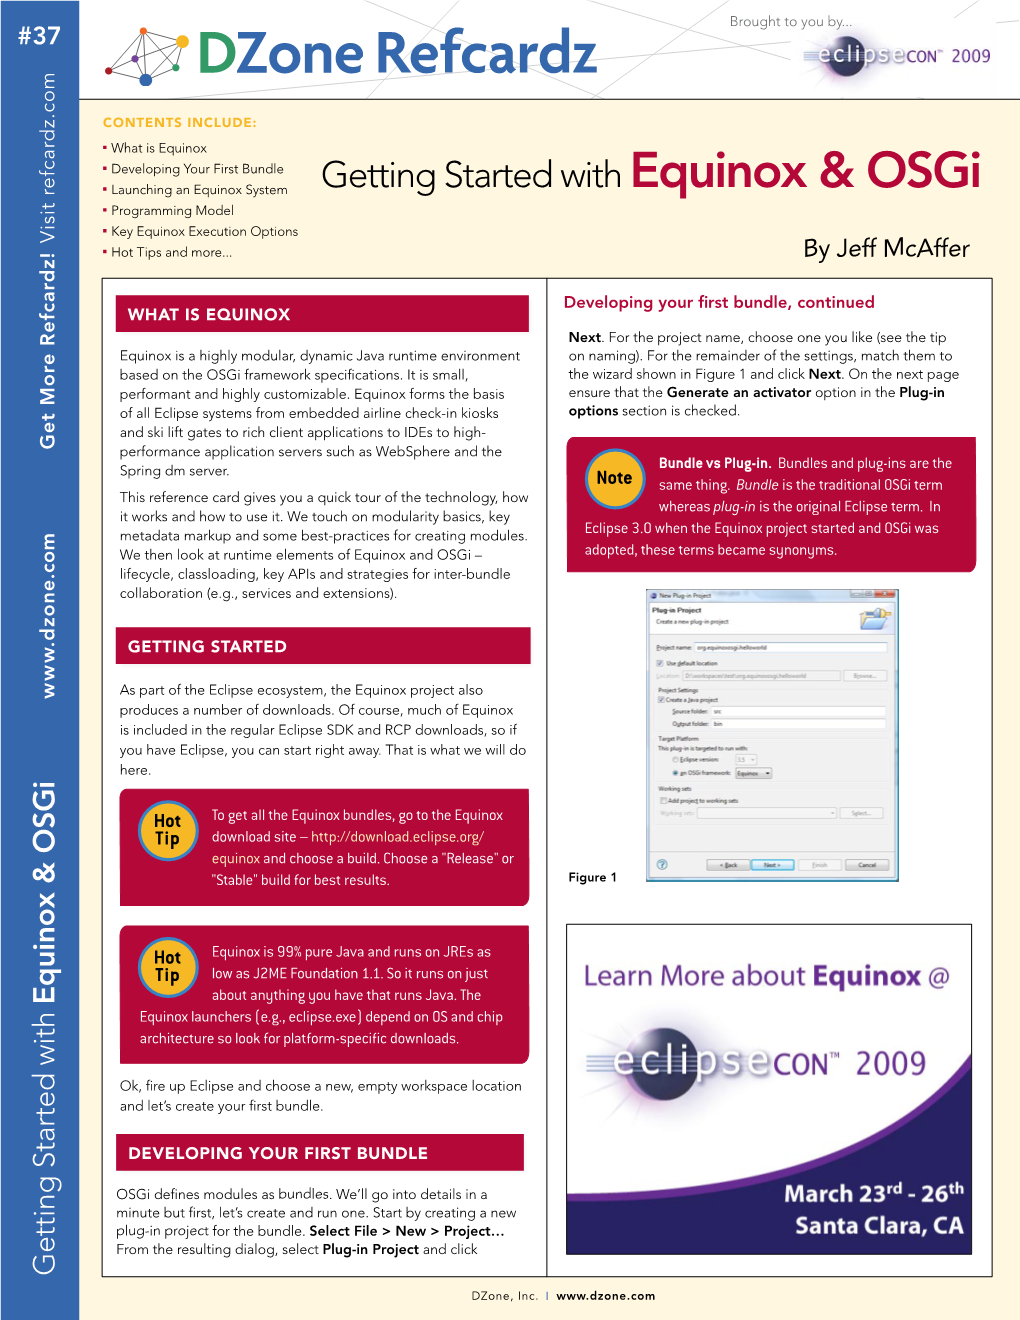 Getting Started with Equinox & Osgi